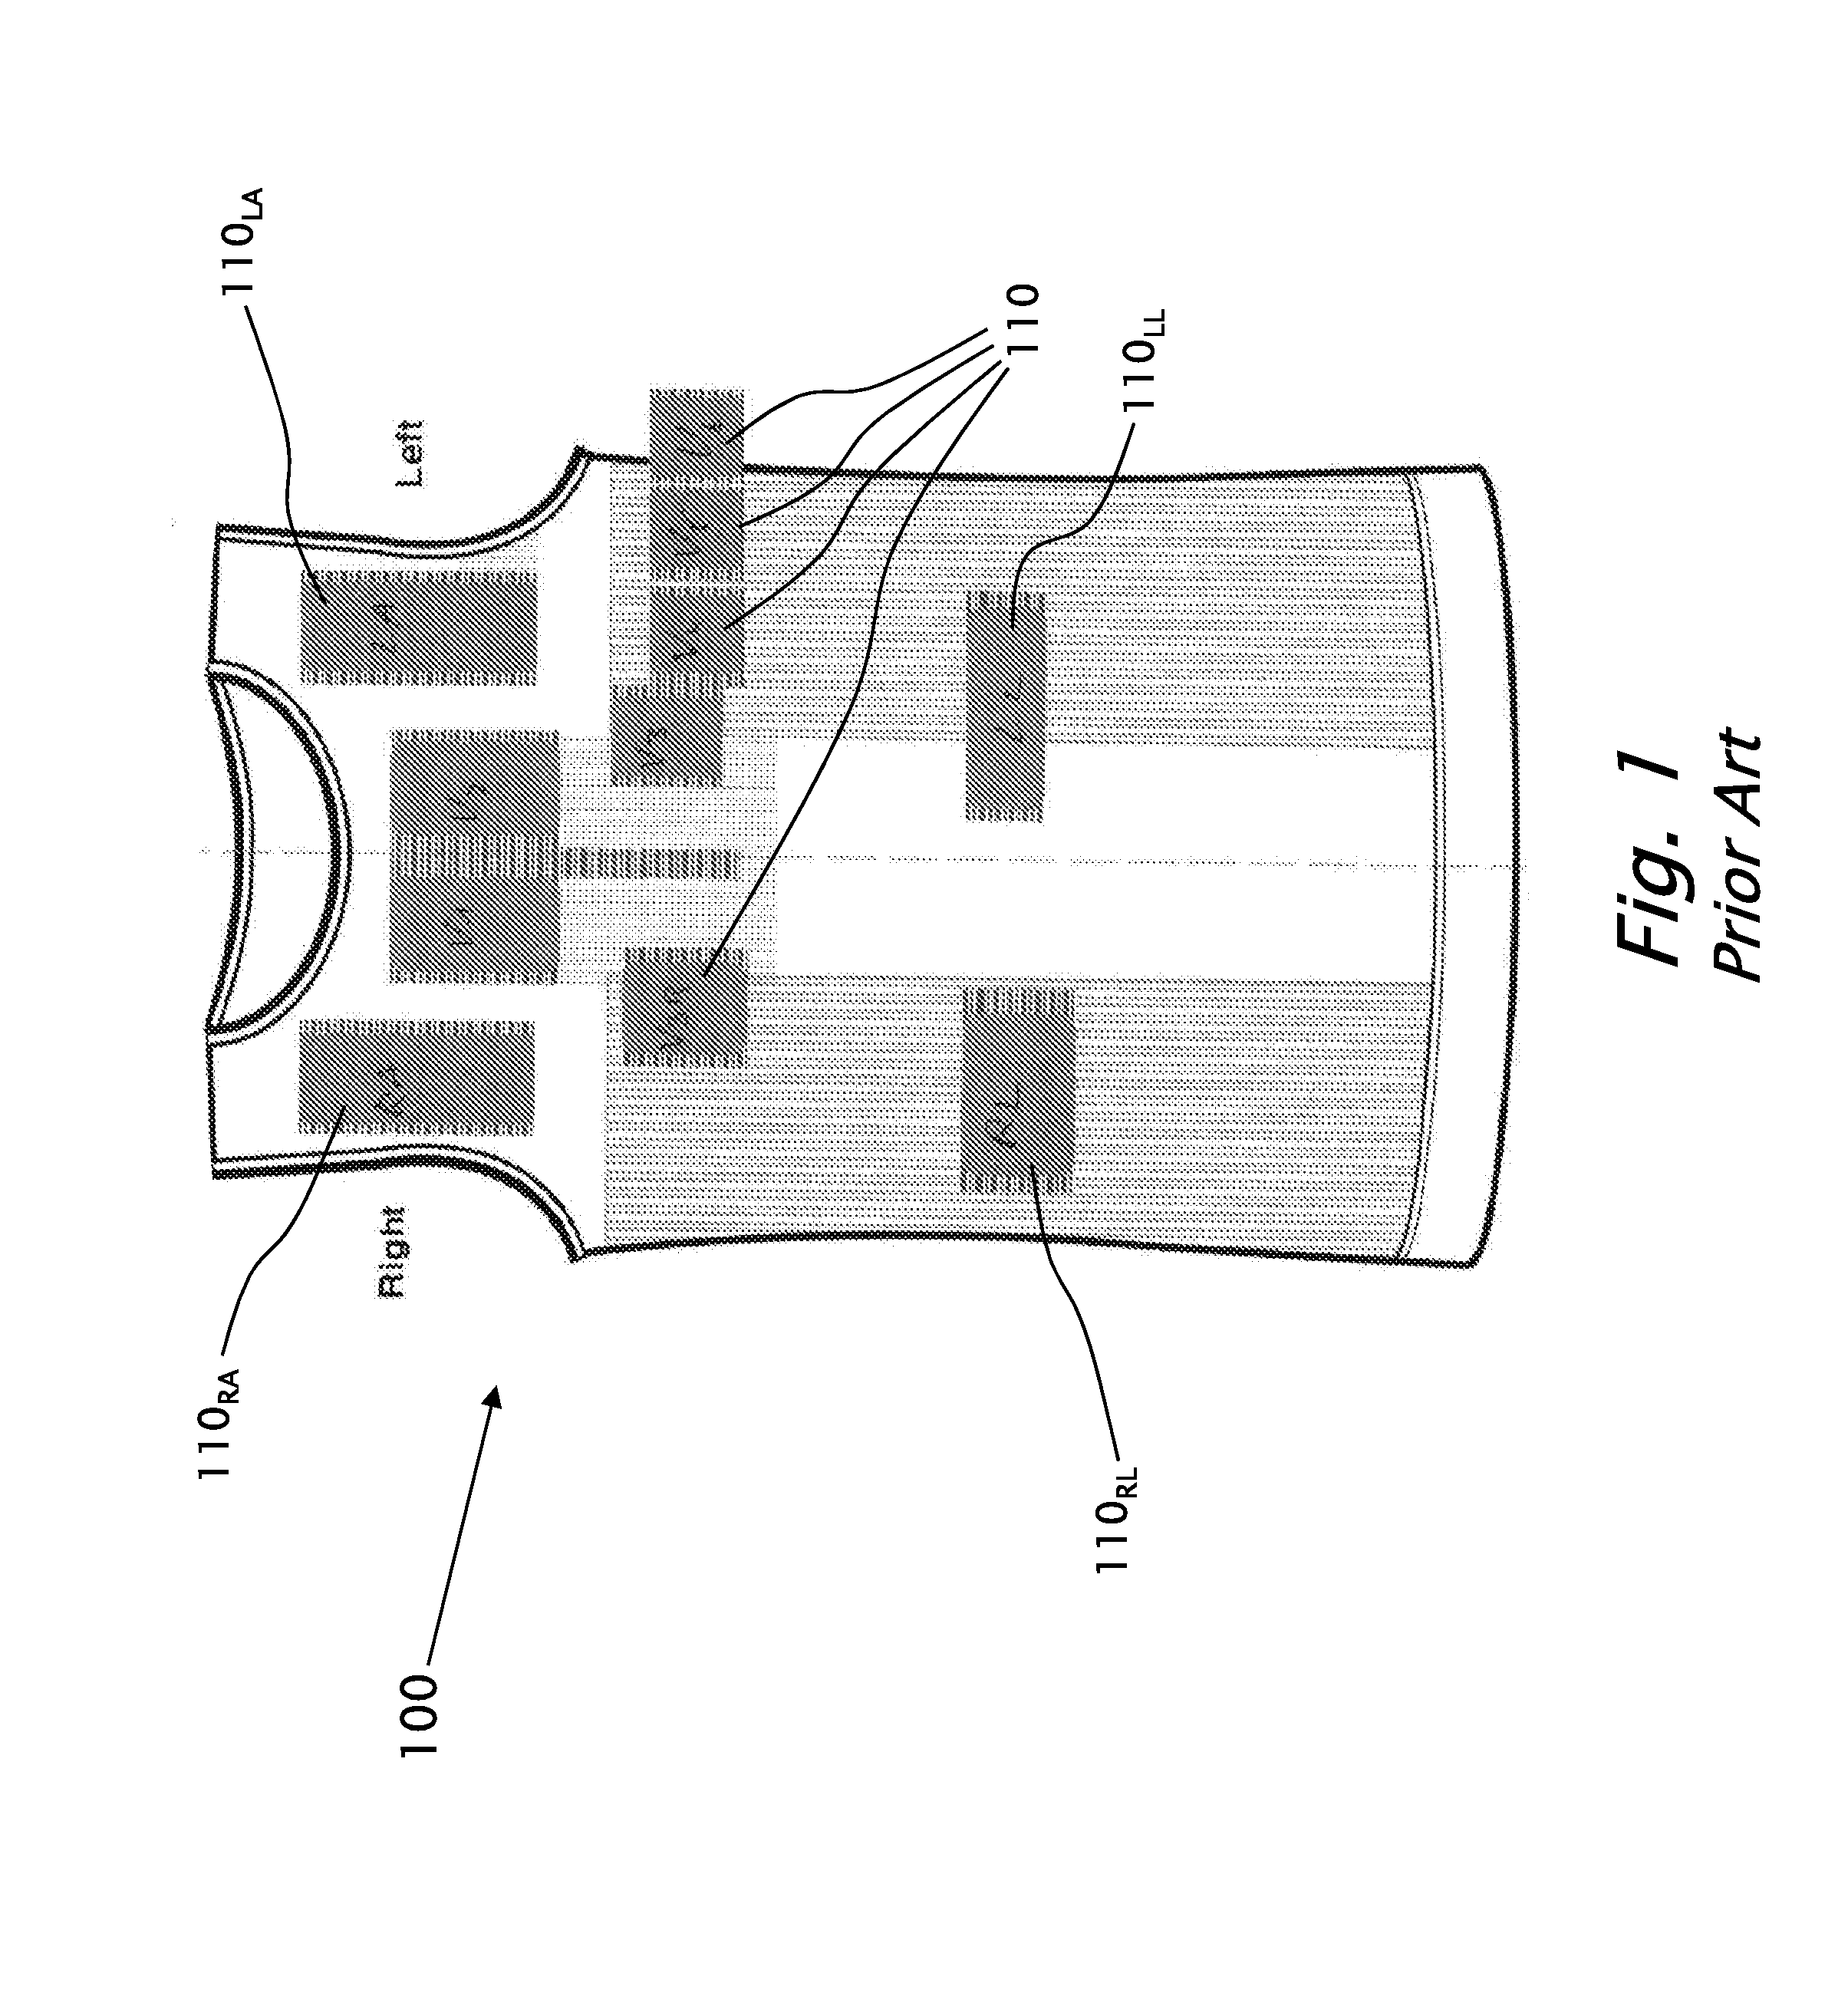 Devices and methods for obtaining workable ECG signals using dry knitted electrodes